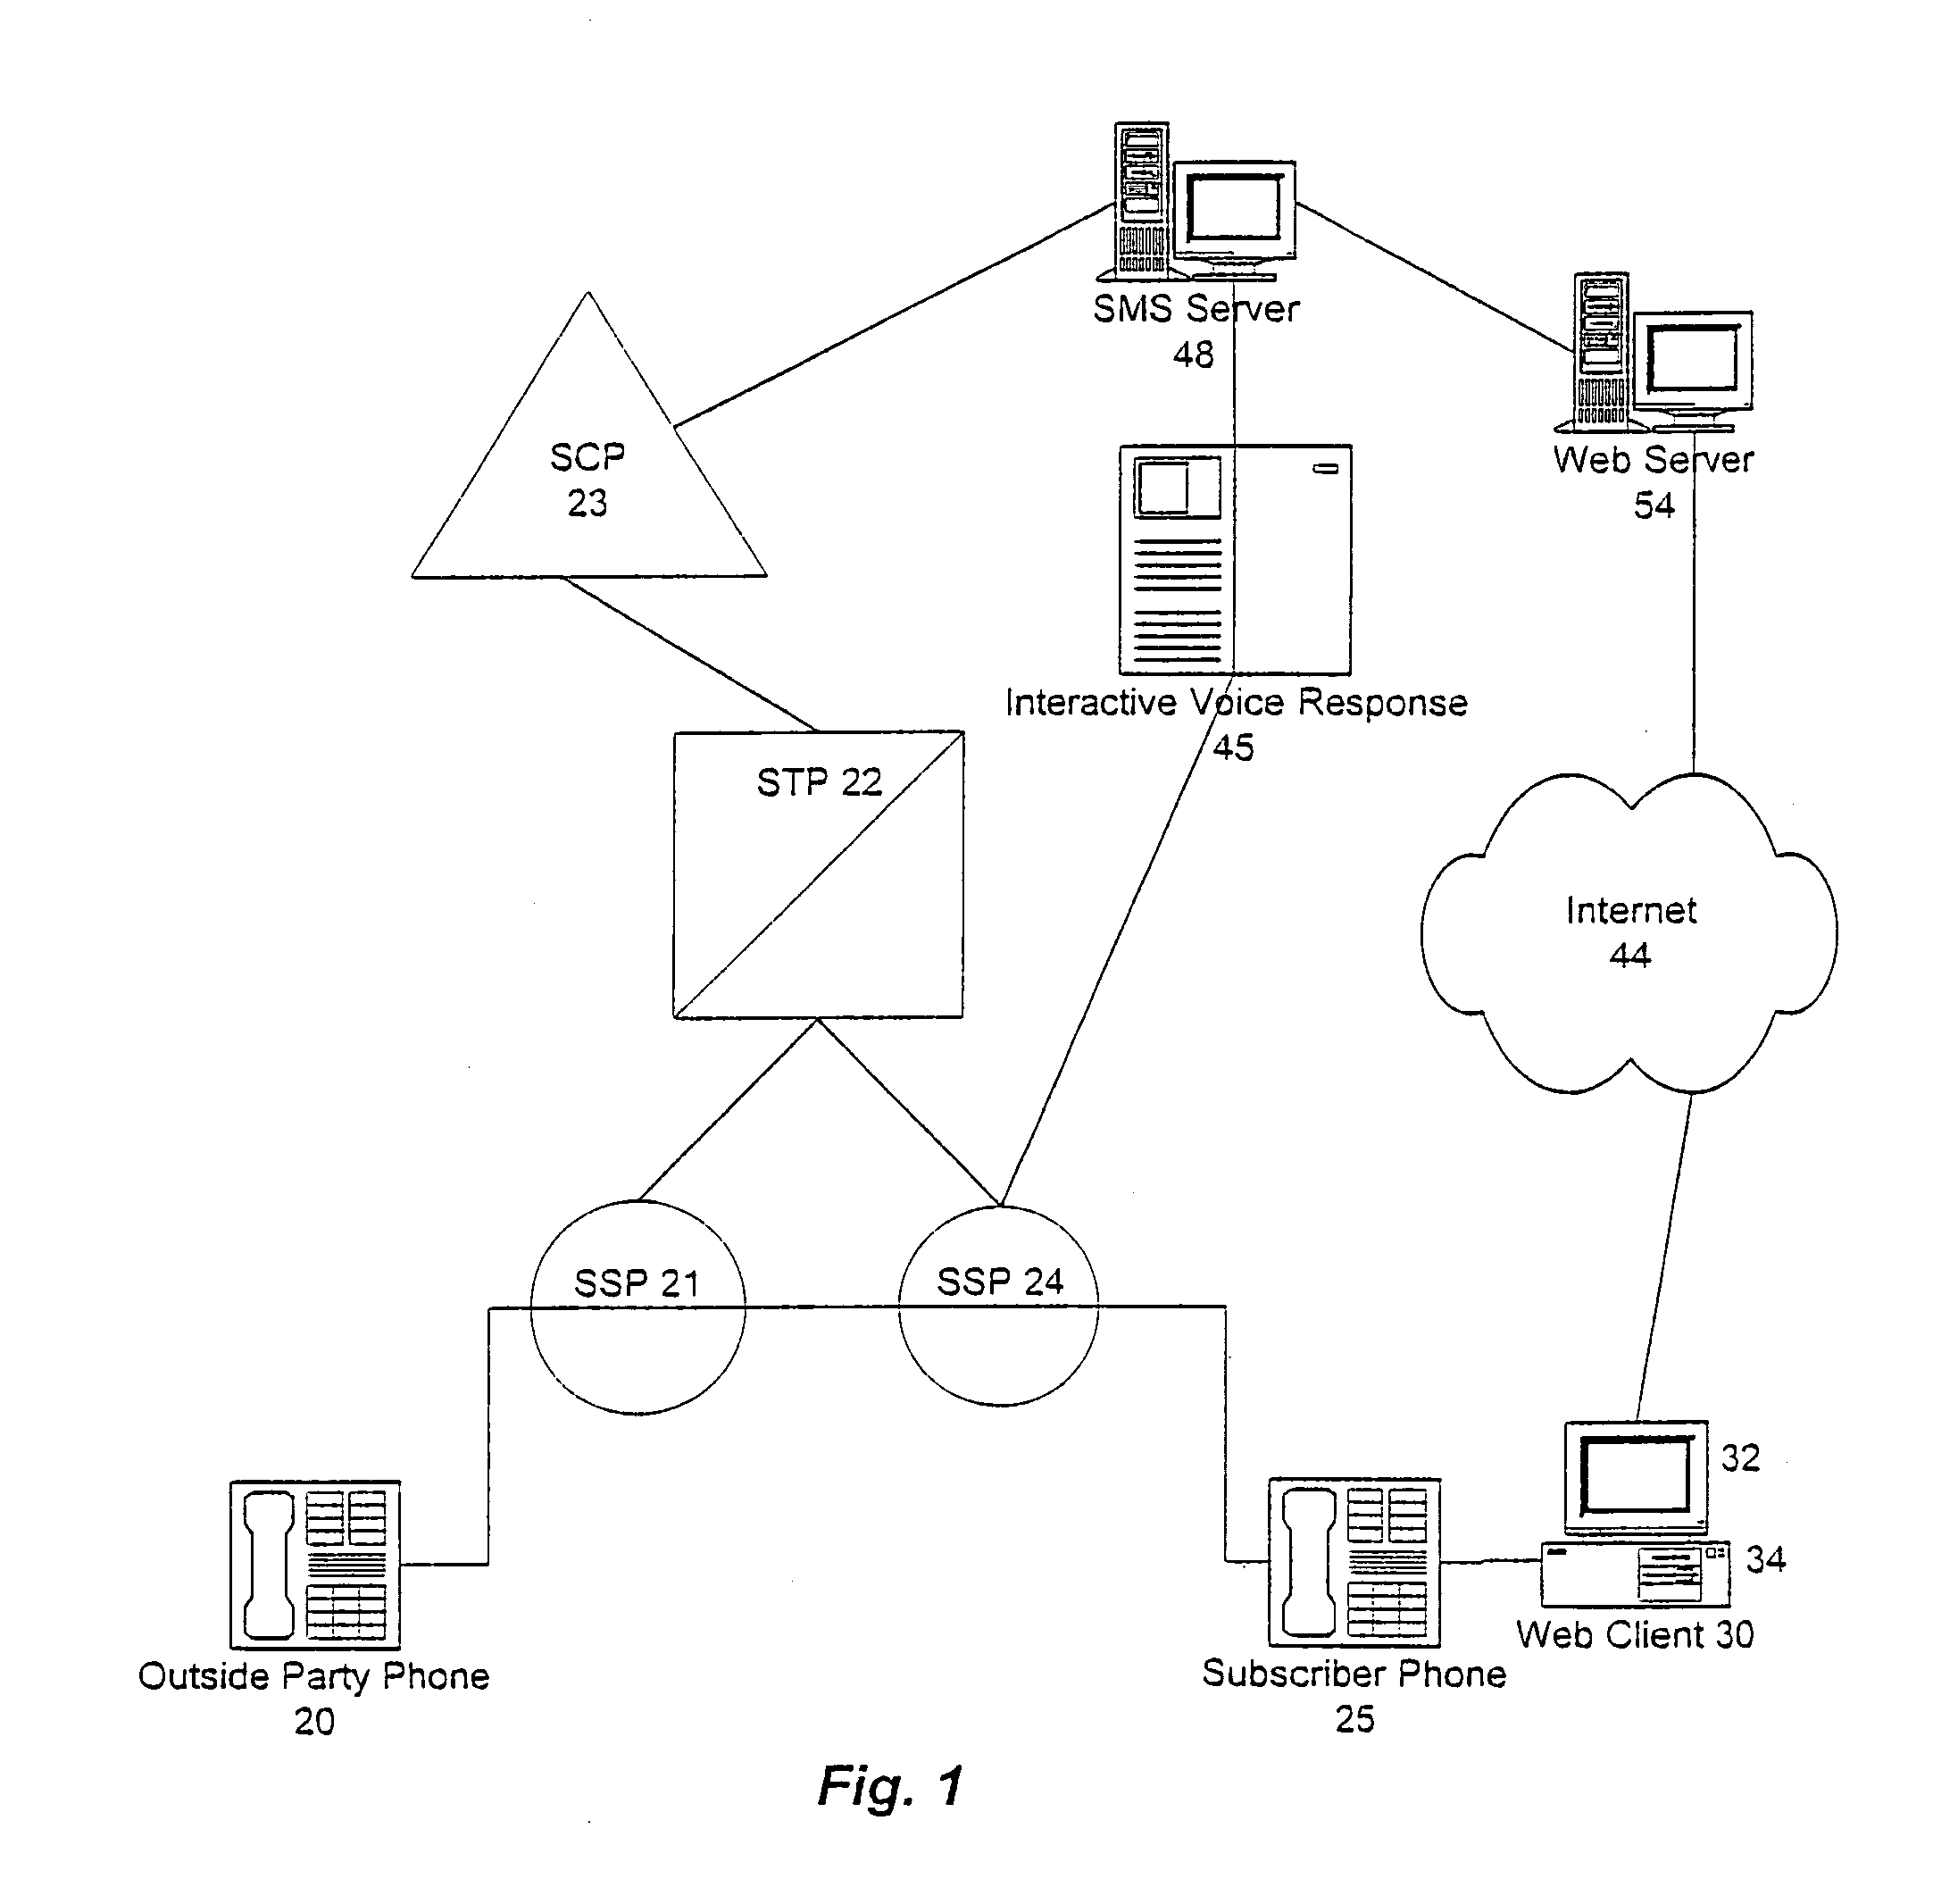 System and method for restricting and monitoring telephone calls